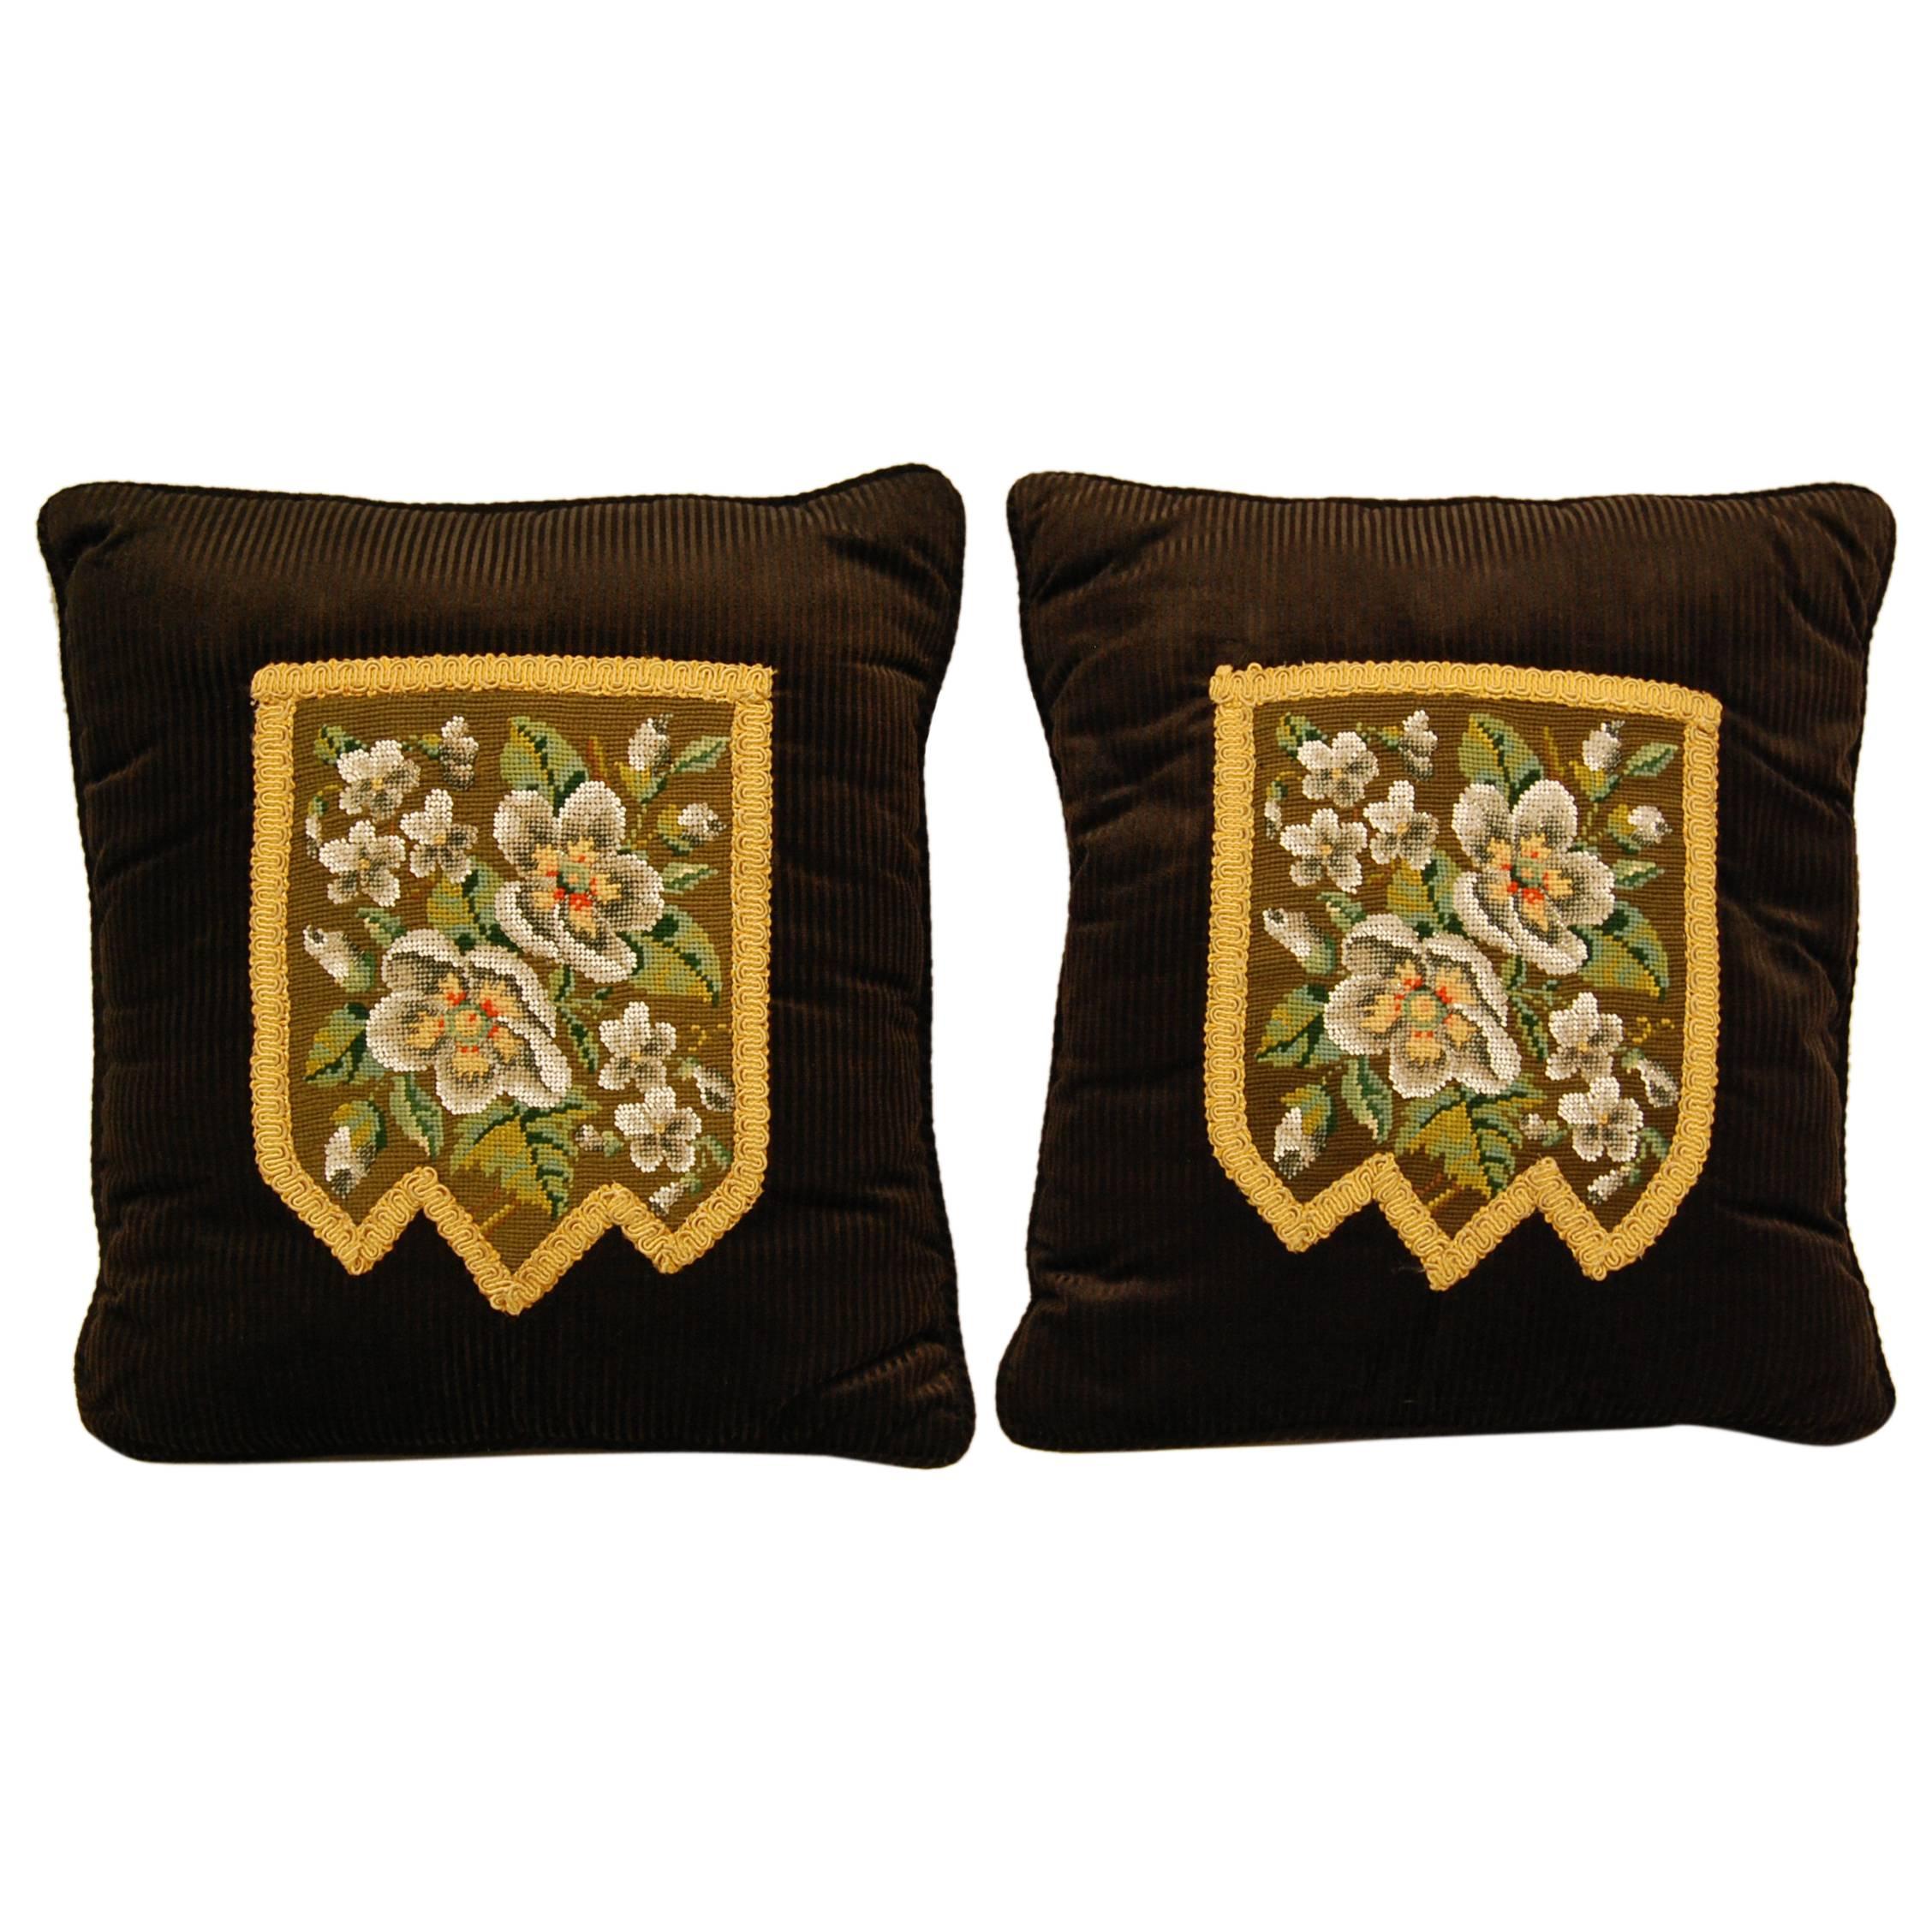 Stunning Pair of Victorian Glass Beaded Floral Designed Pillow Covers